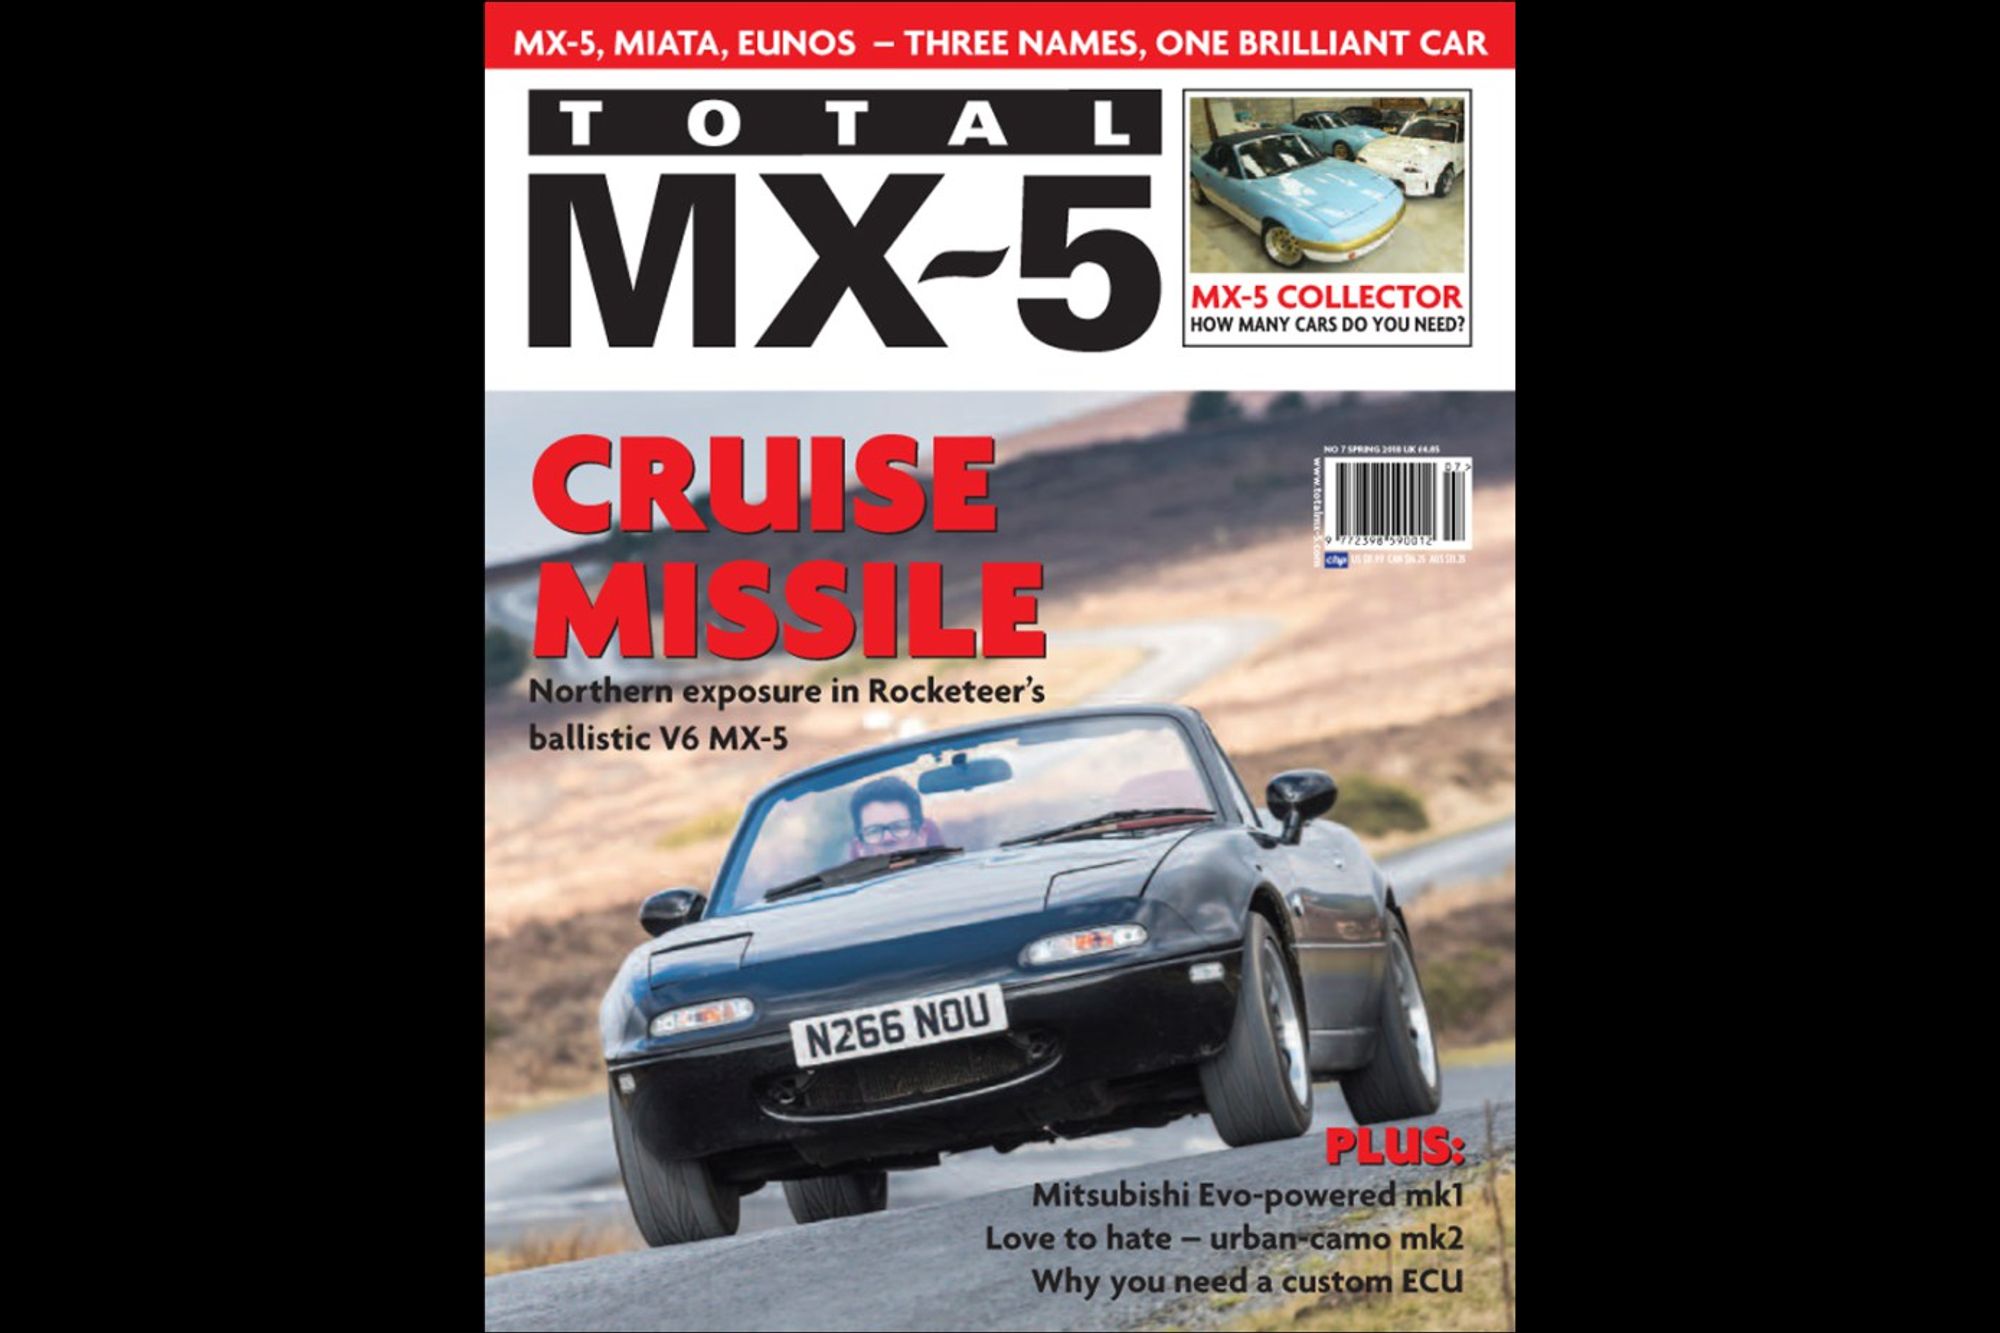 Total MX-5 magazine write about their road-trip in the 260bhp MXV6 demo car